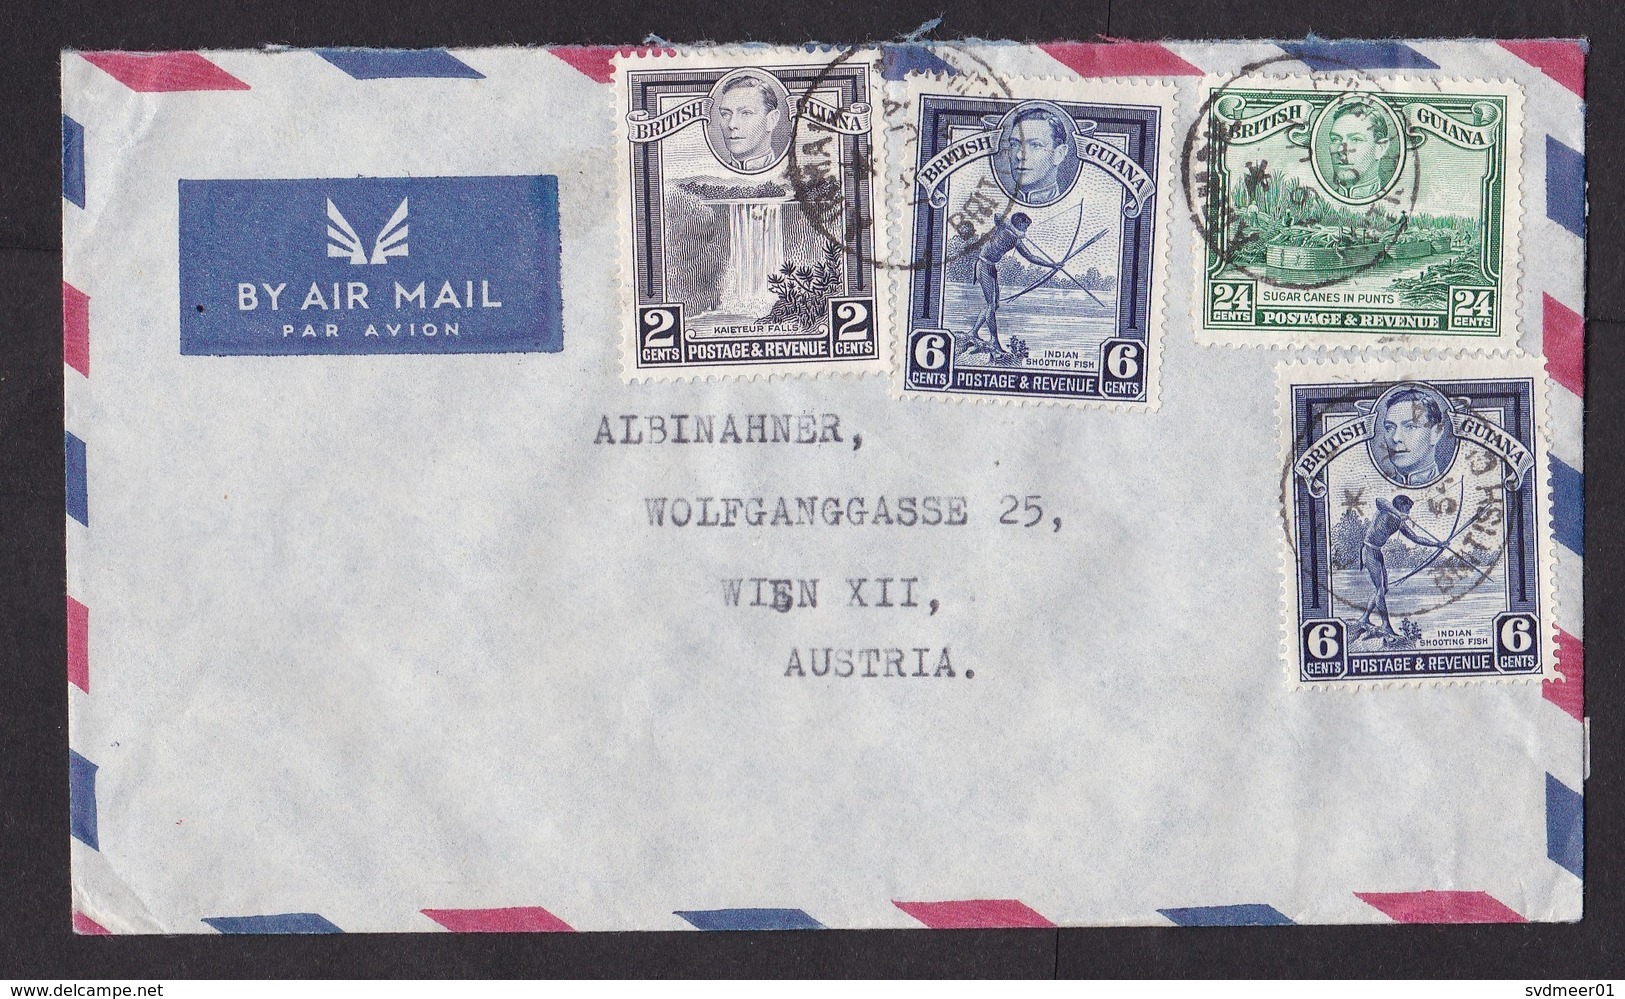 British Guiana: Airmail Cover To Austria, 1954, 4 Stamps, George VI, Waterfall, Fishing, Sugar Cane Ship (traces Of Use) - British Guiana (...-1966)